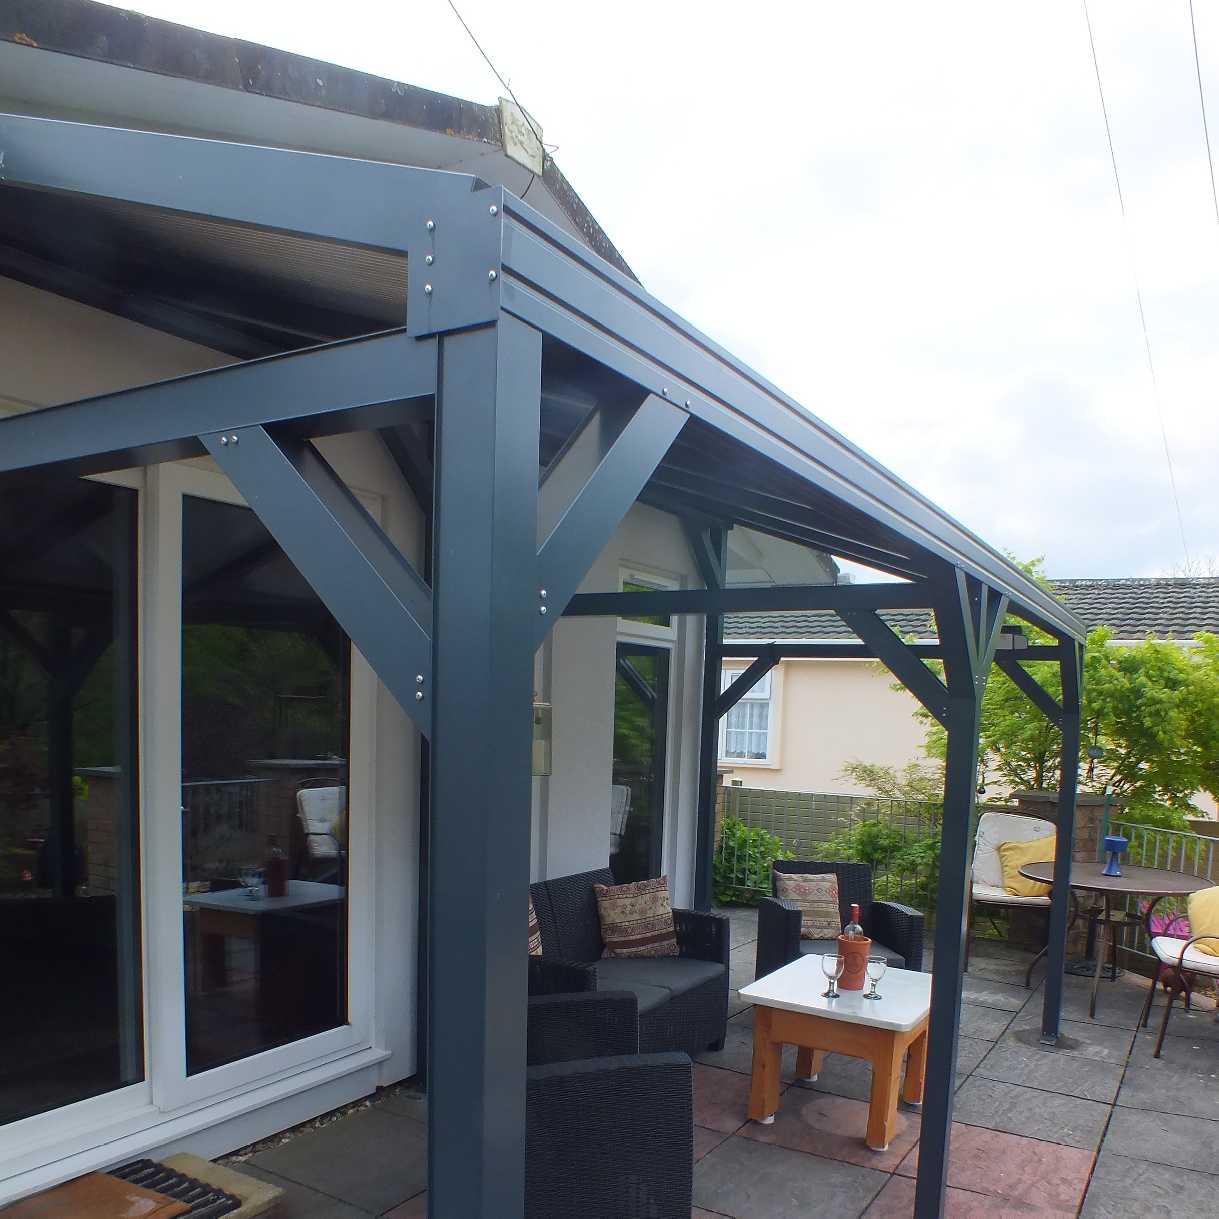 Affordable Omega Smart Free-Standing, Anthracite Grey MonoPitch Roof Canopy with 16mm Polycarbonate Glazing - 6.3m (W) x 3.0m (P), (8) Supporting Posts